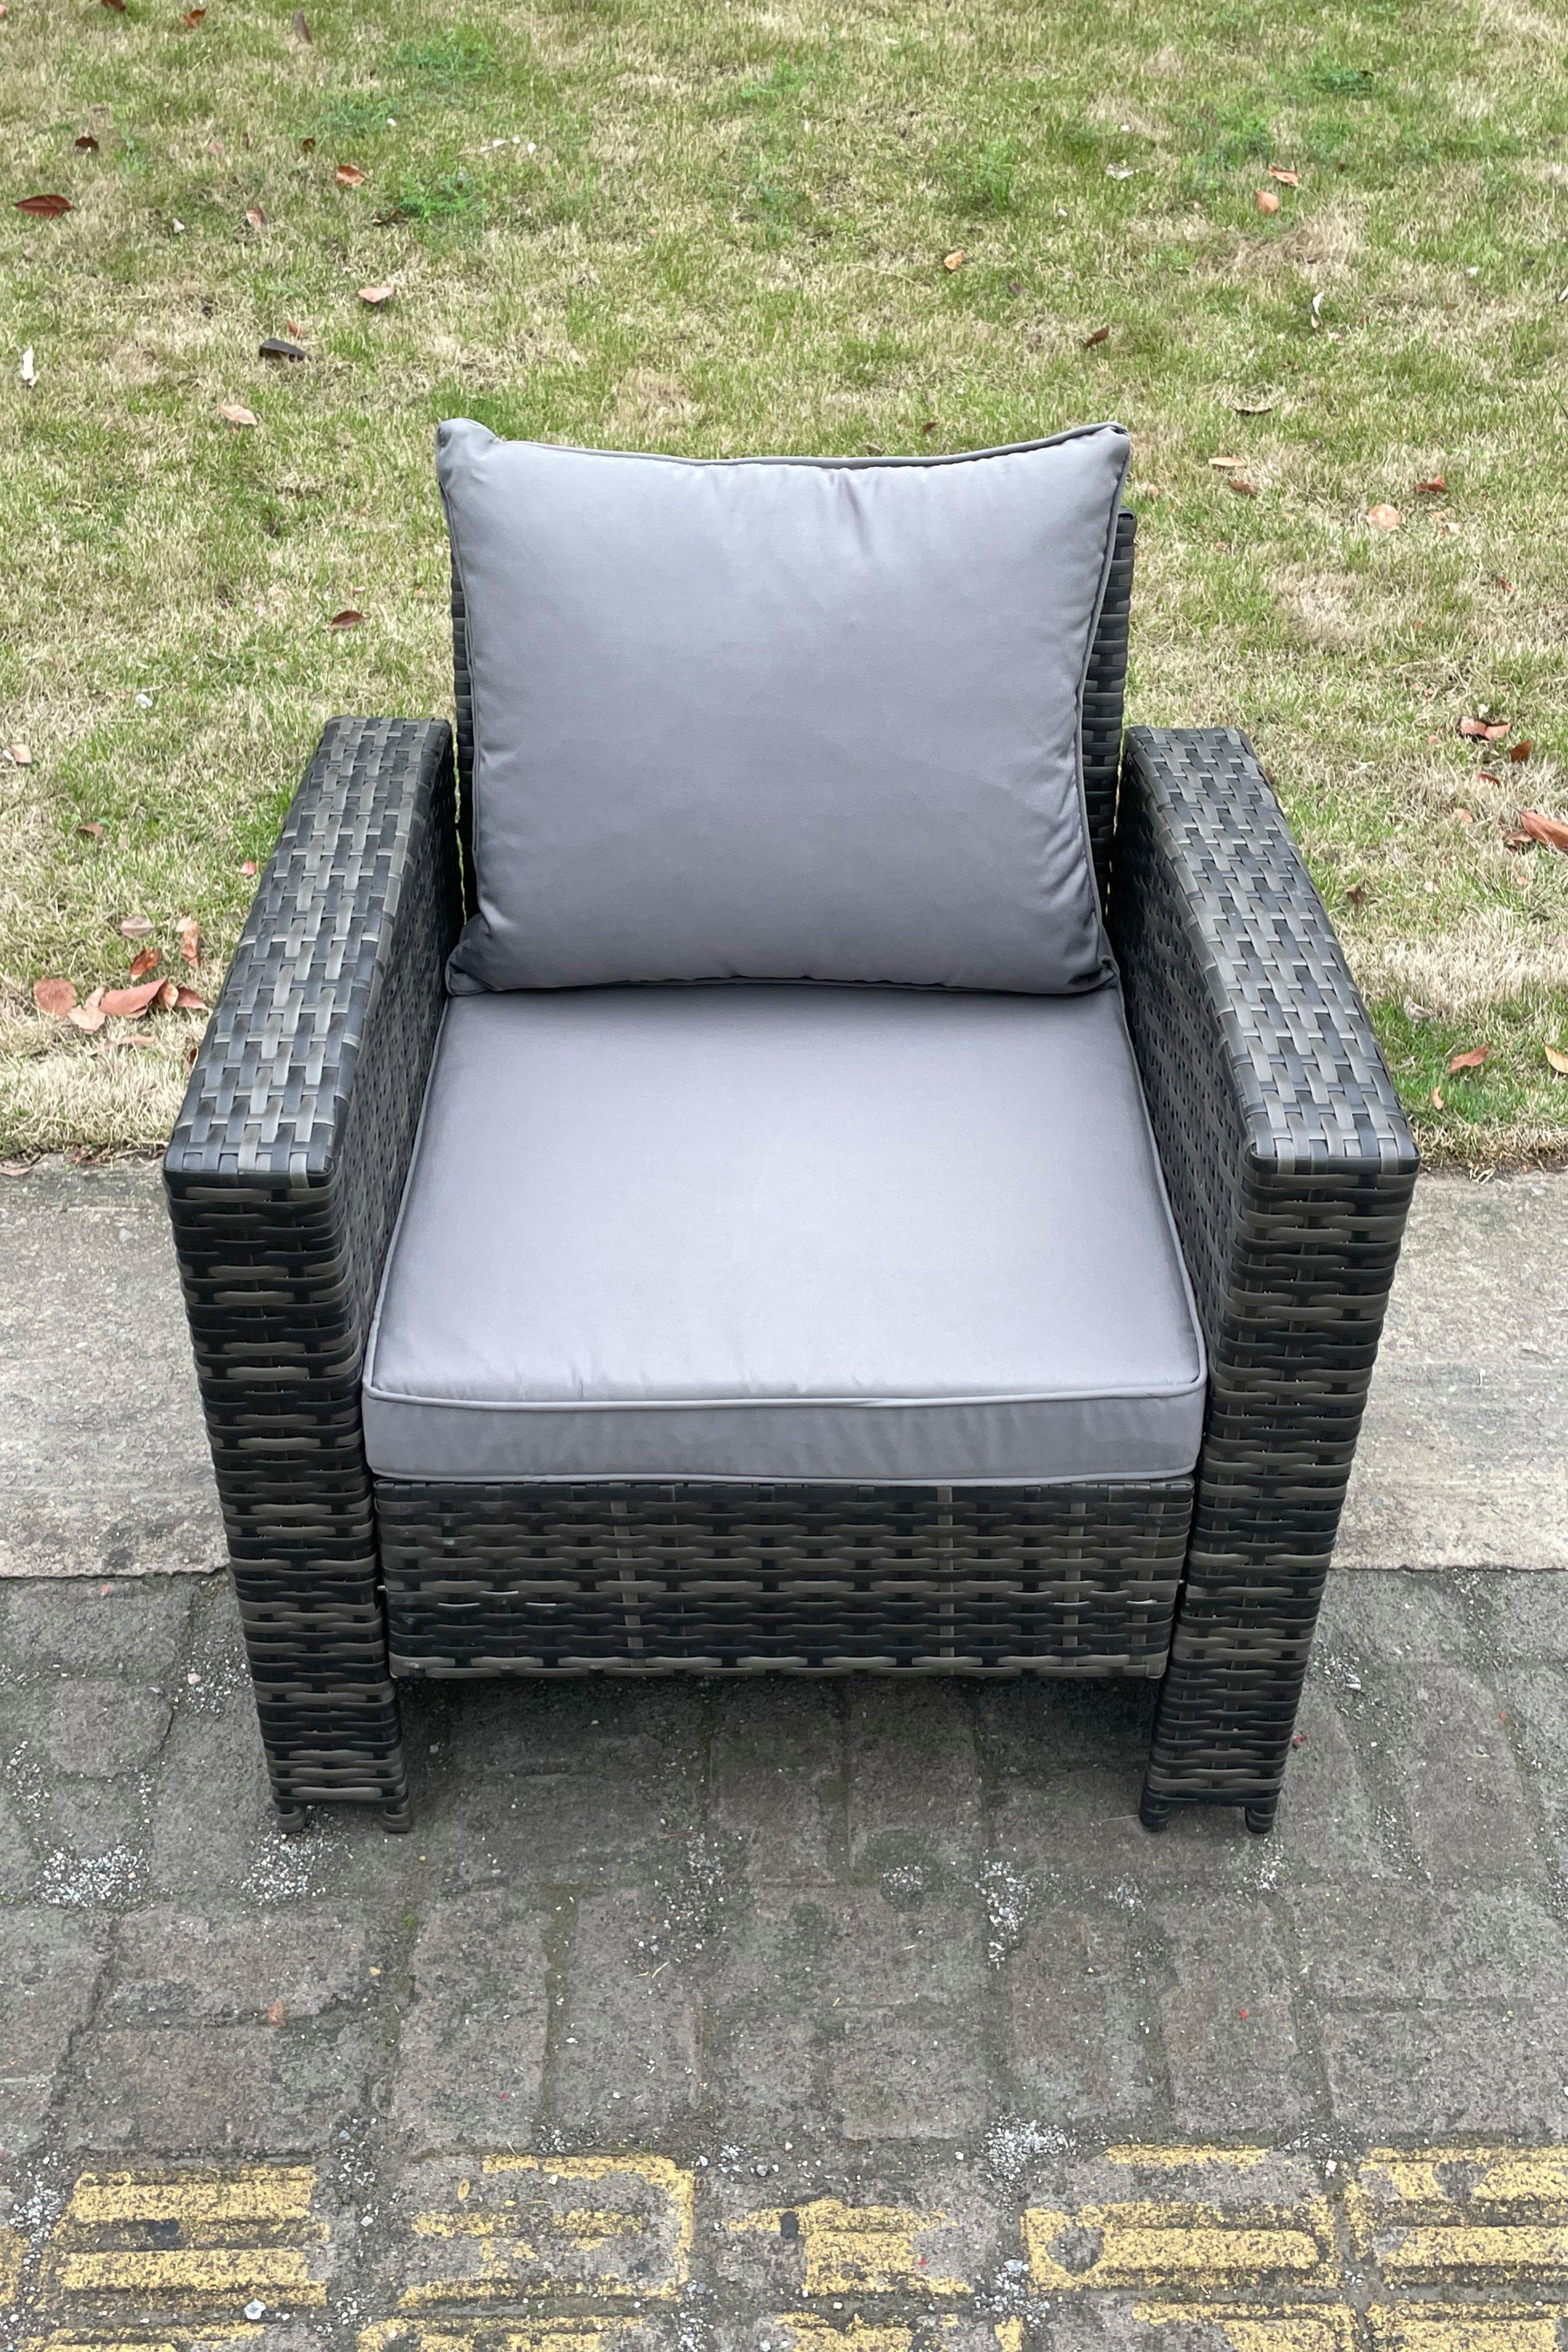 High Back Rattan Single Arm Chair Thick Seat And Back Cushion